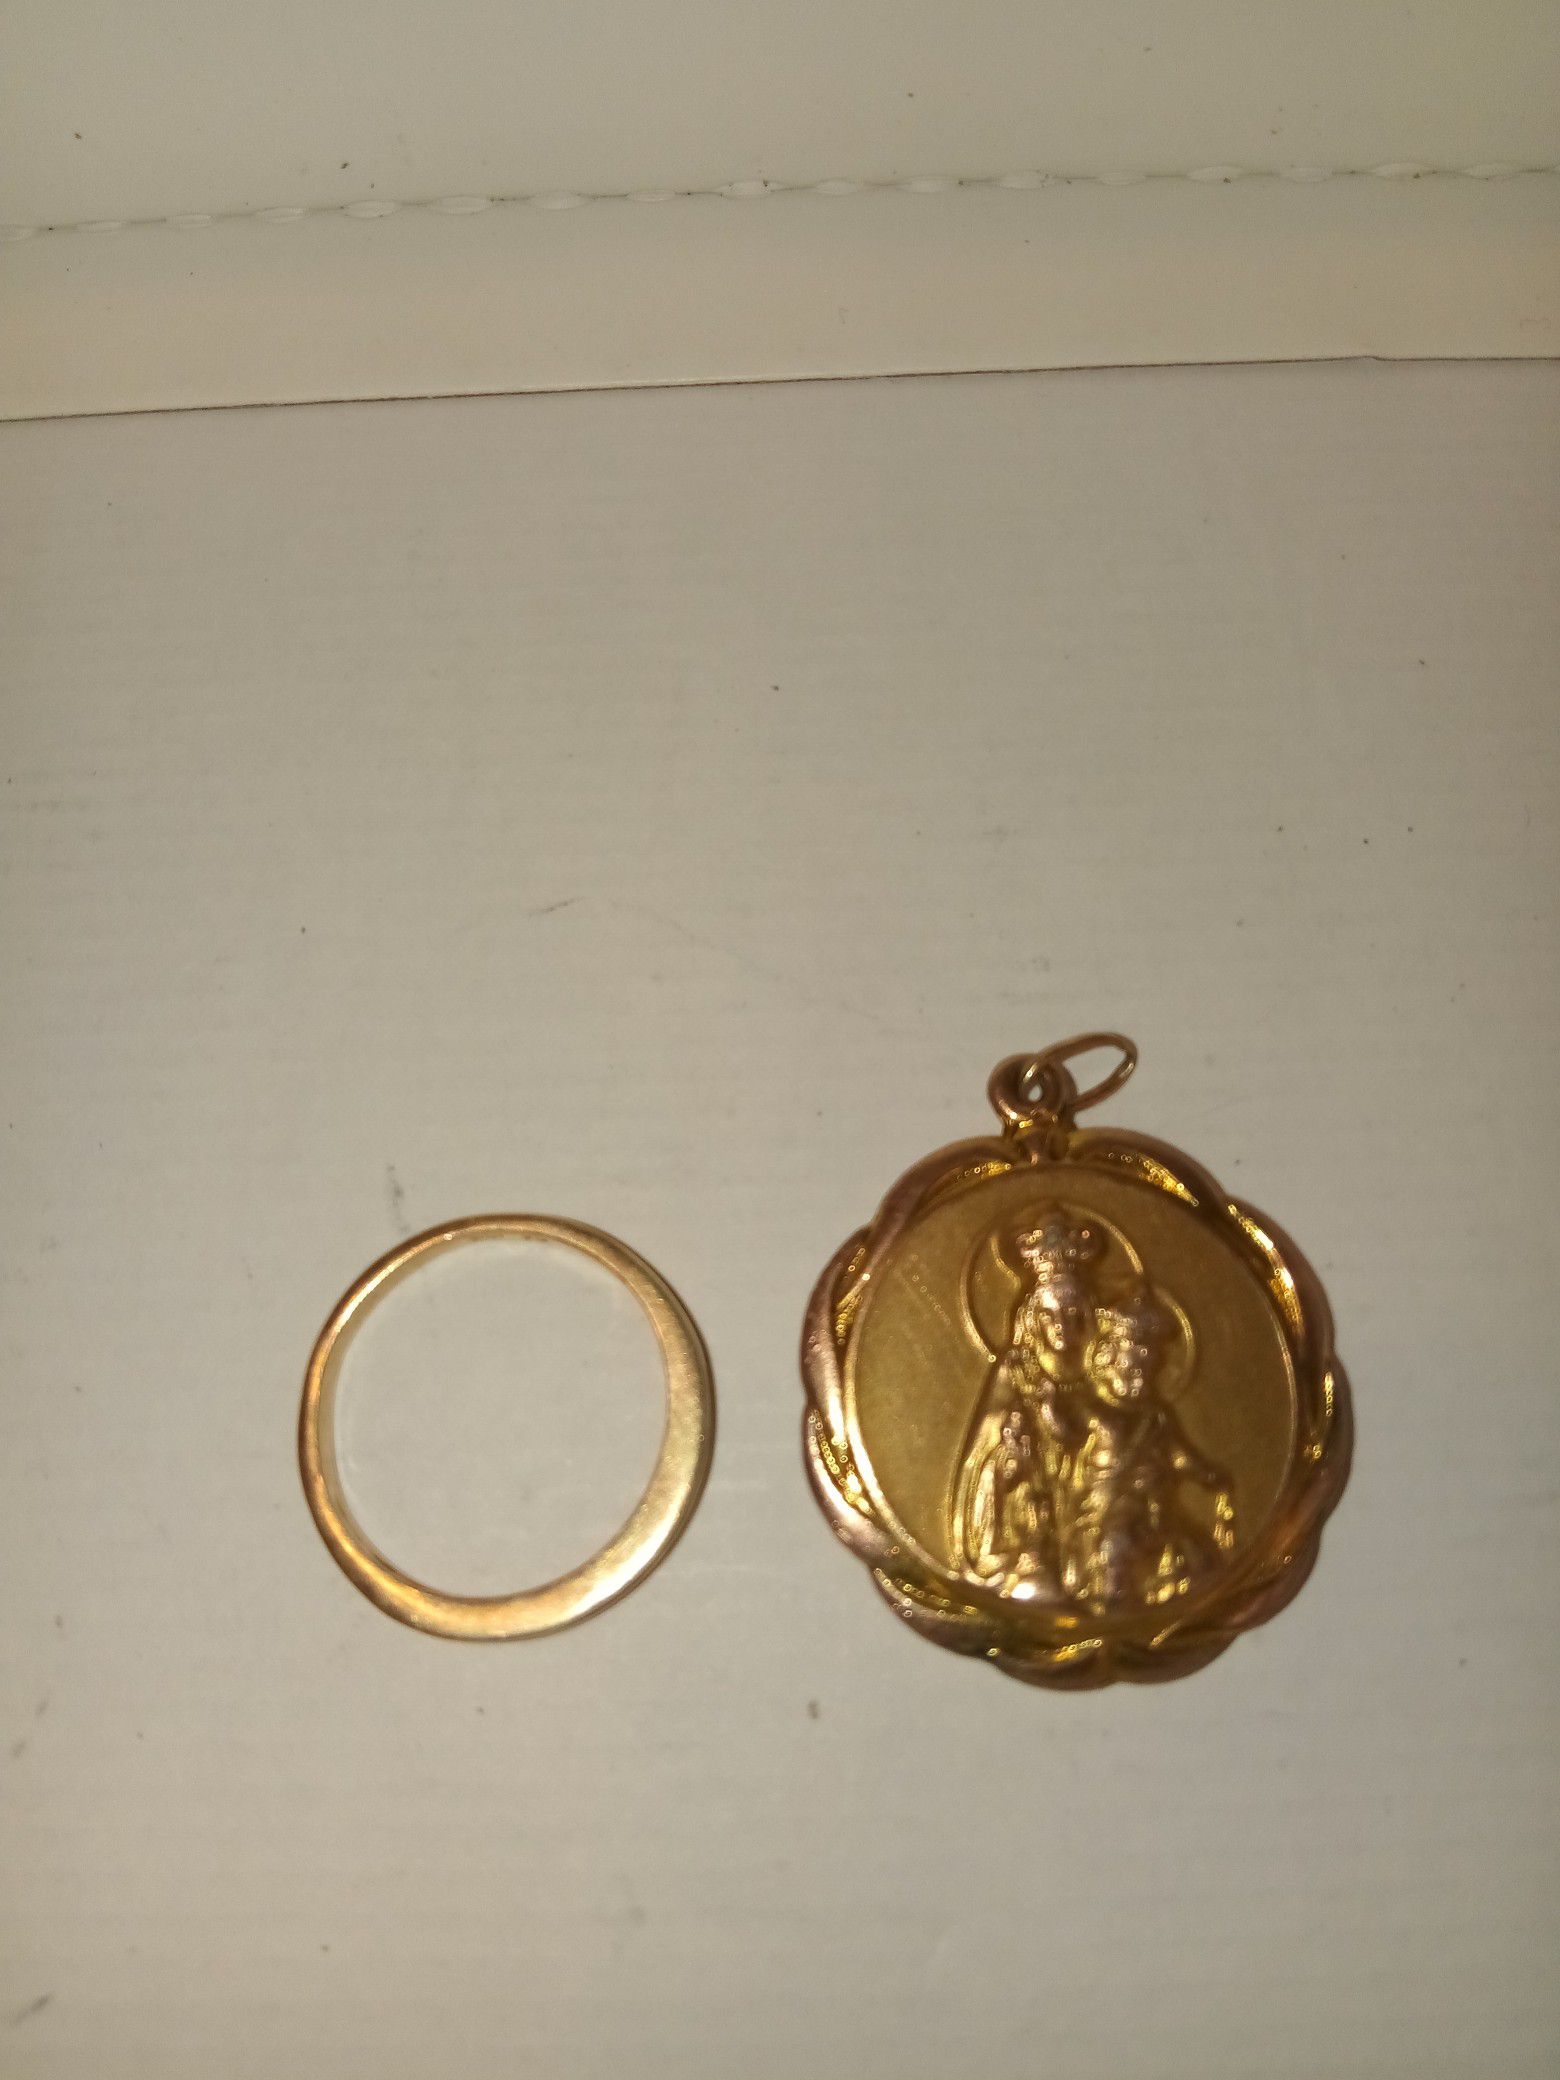 10 karat gold ring with diamonds and a gold pendant